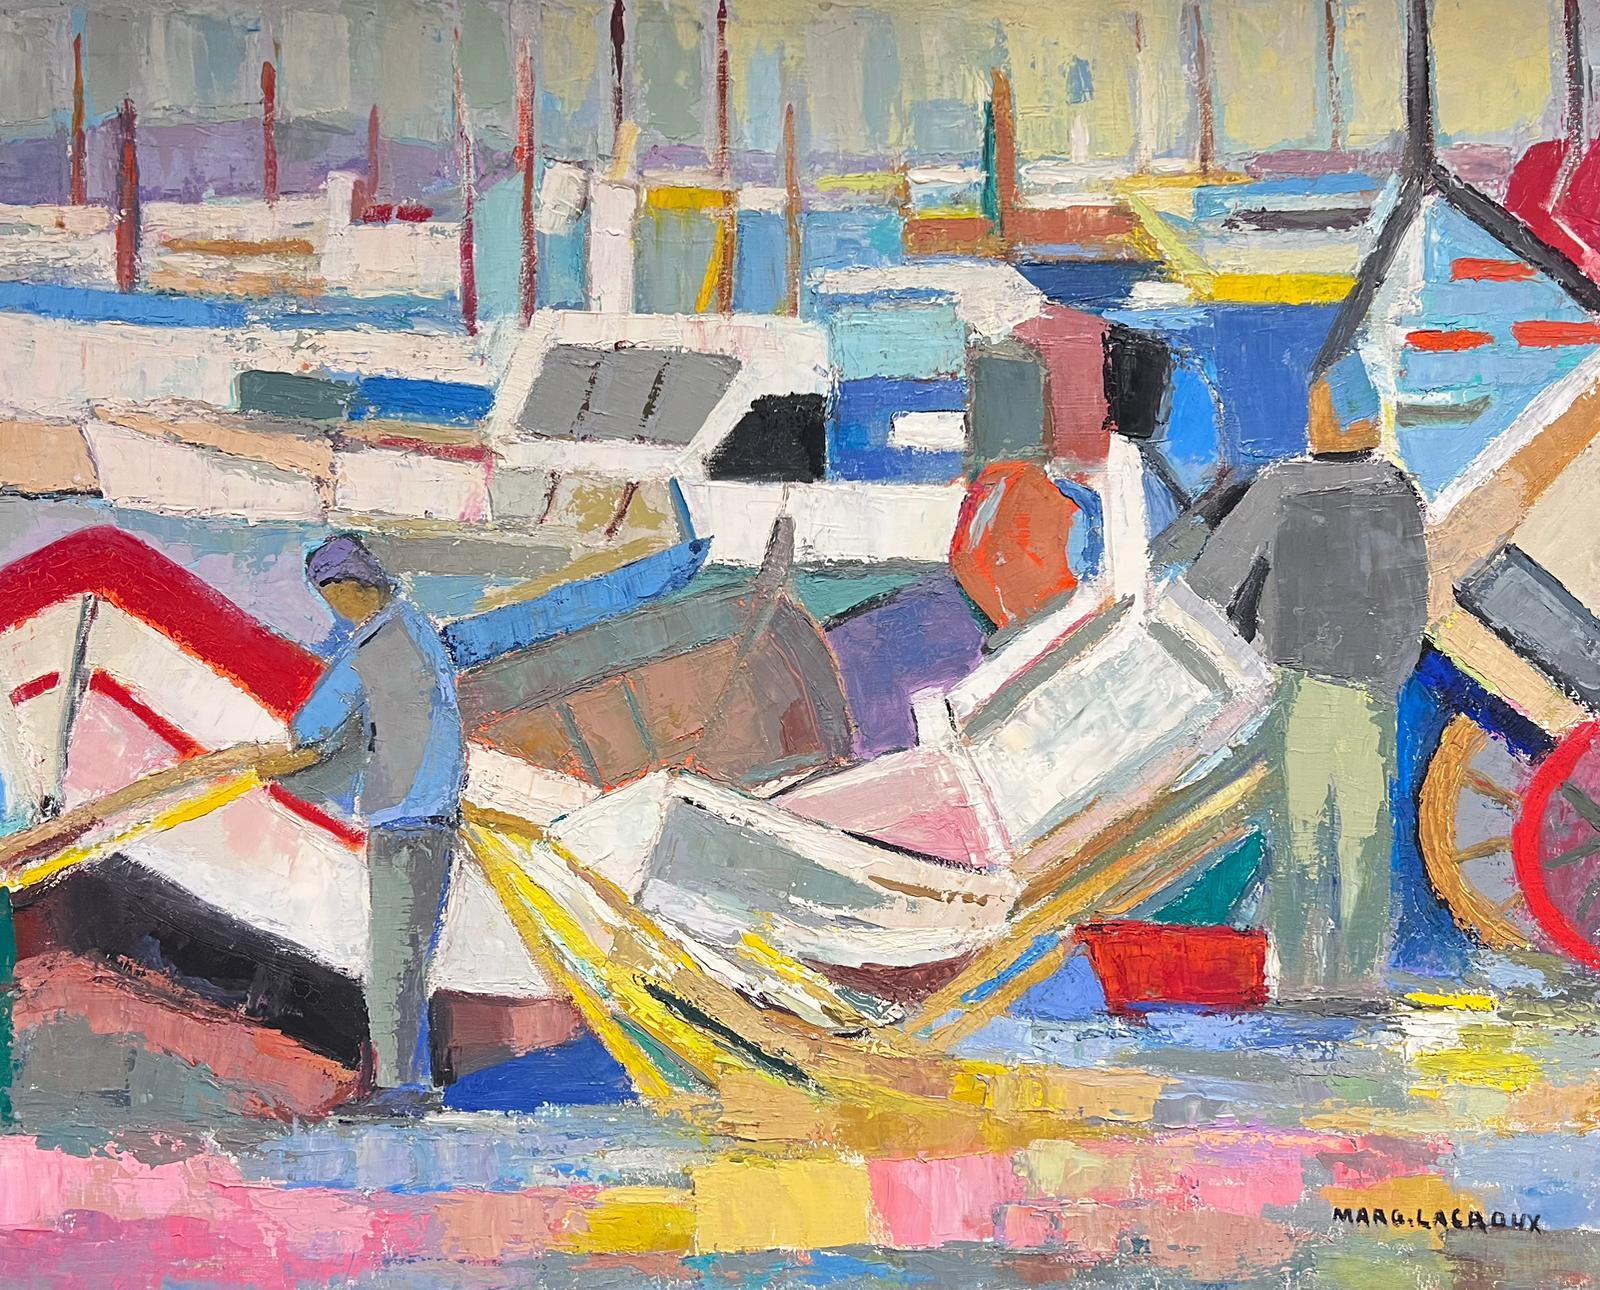 Huge Mid 20th Century French Cubist Signed Oil Fisherman with Boats Harbor Quay